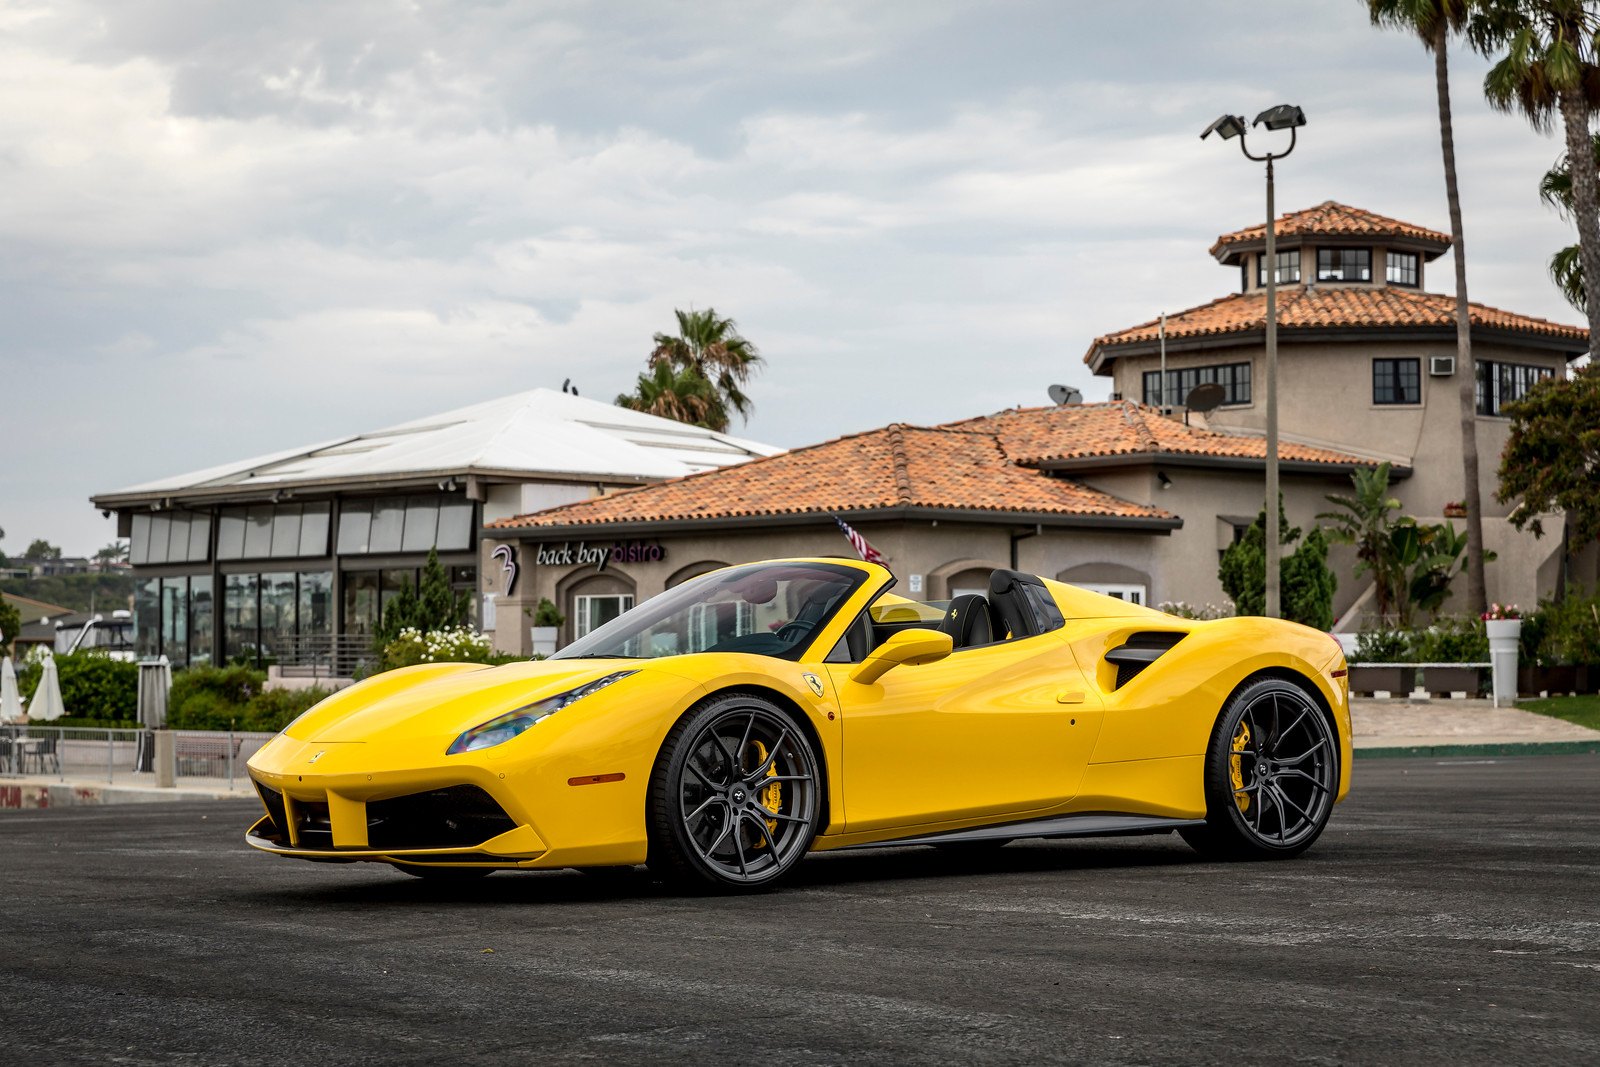 Aftermarket Side Scoops on Yellow Convertible Ferrari 458 - Photo by Vorstiner